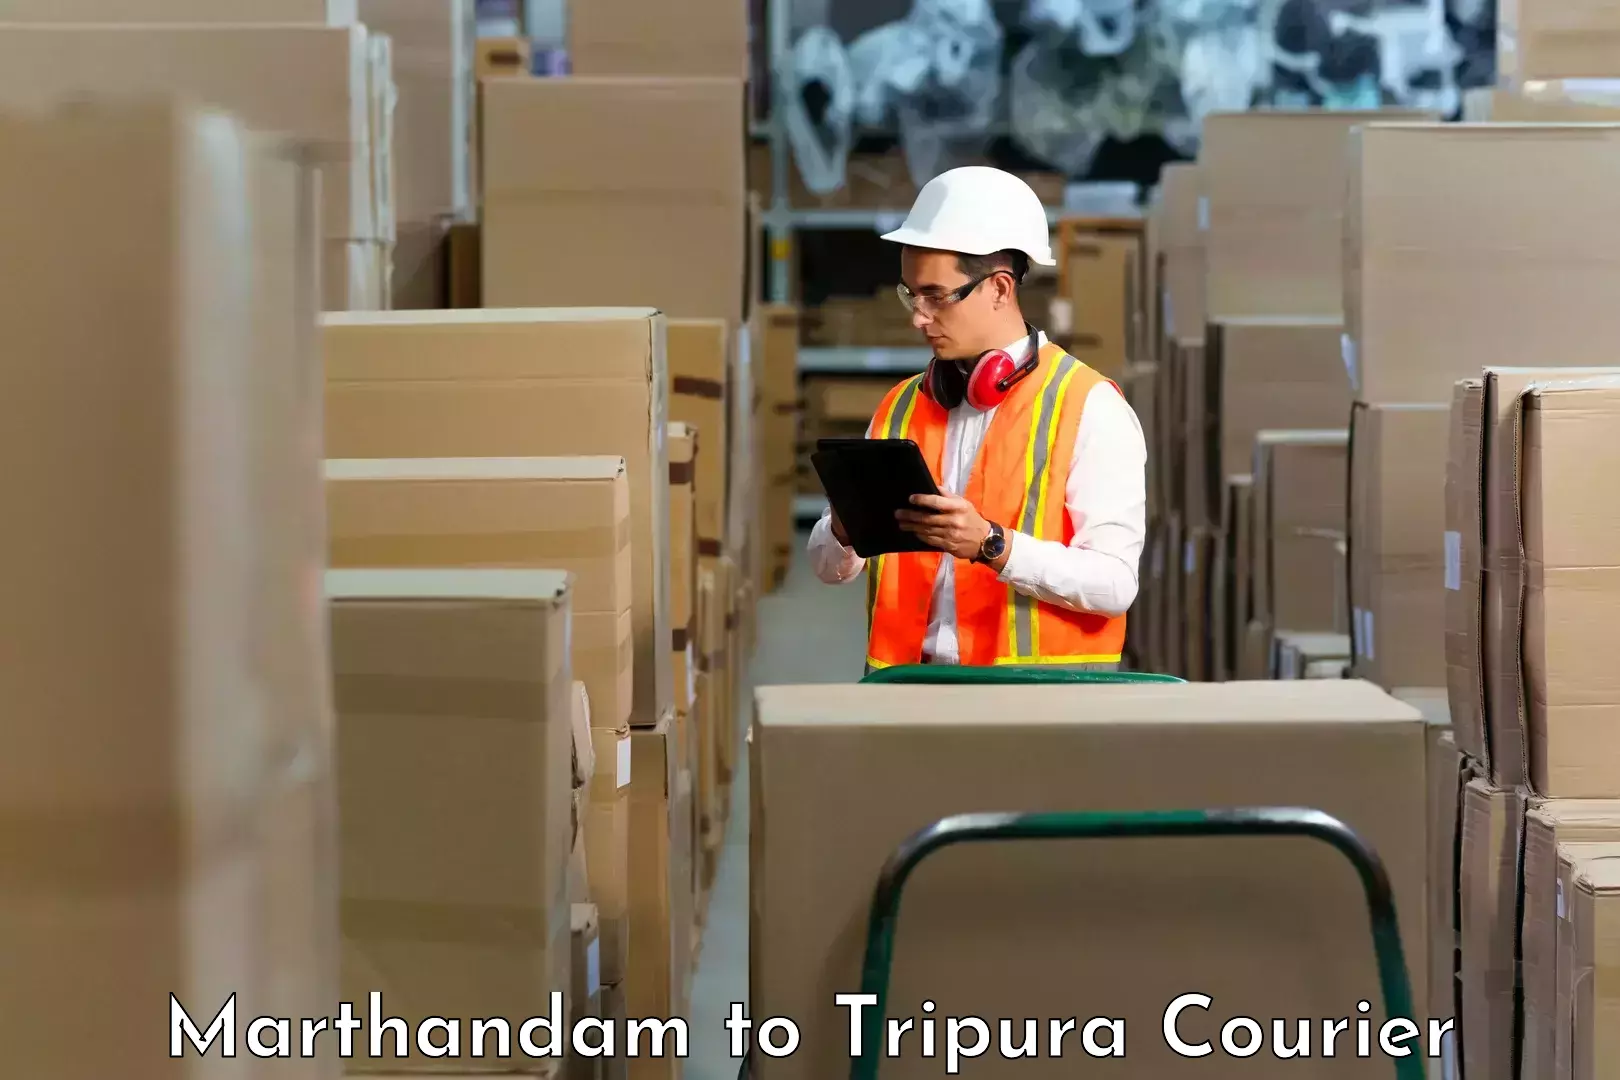 State-of-the-art courier technology Marthandam to Tripura